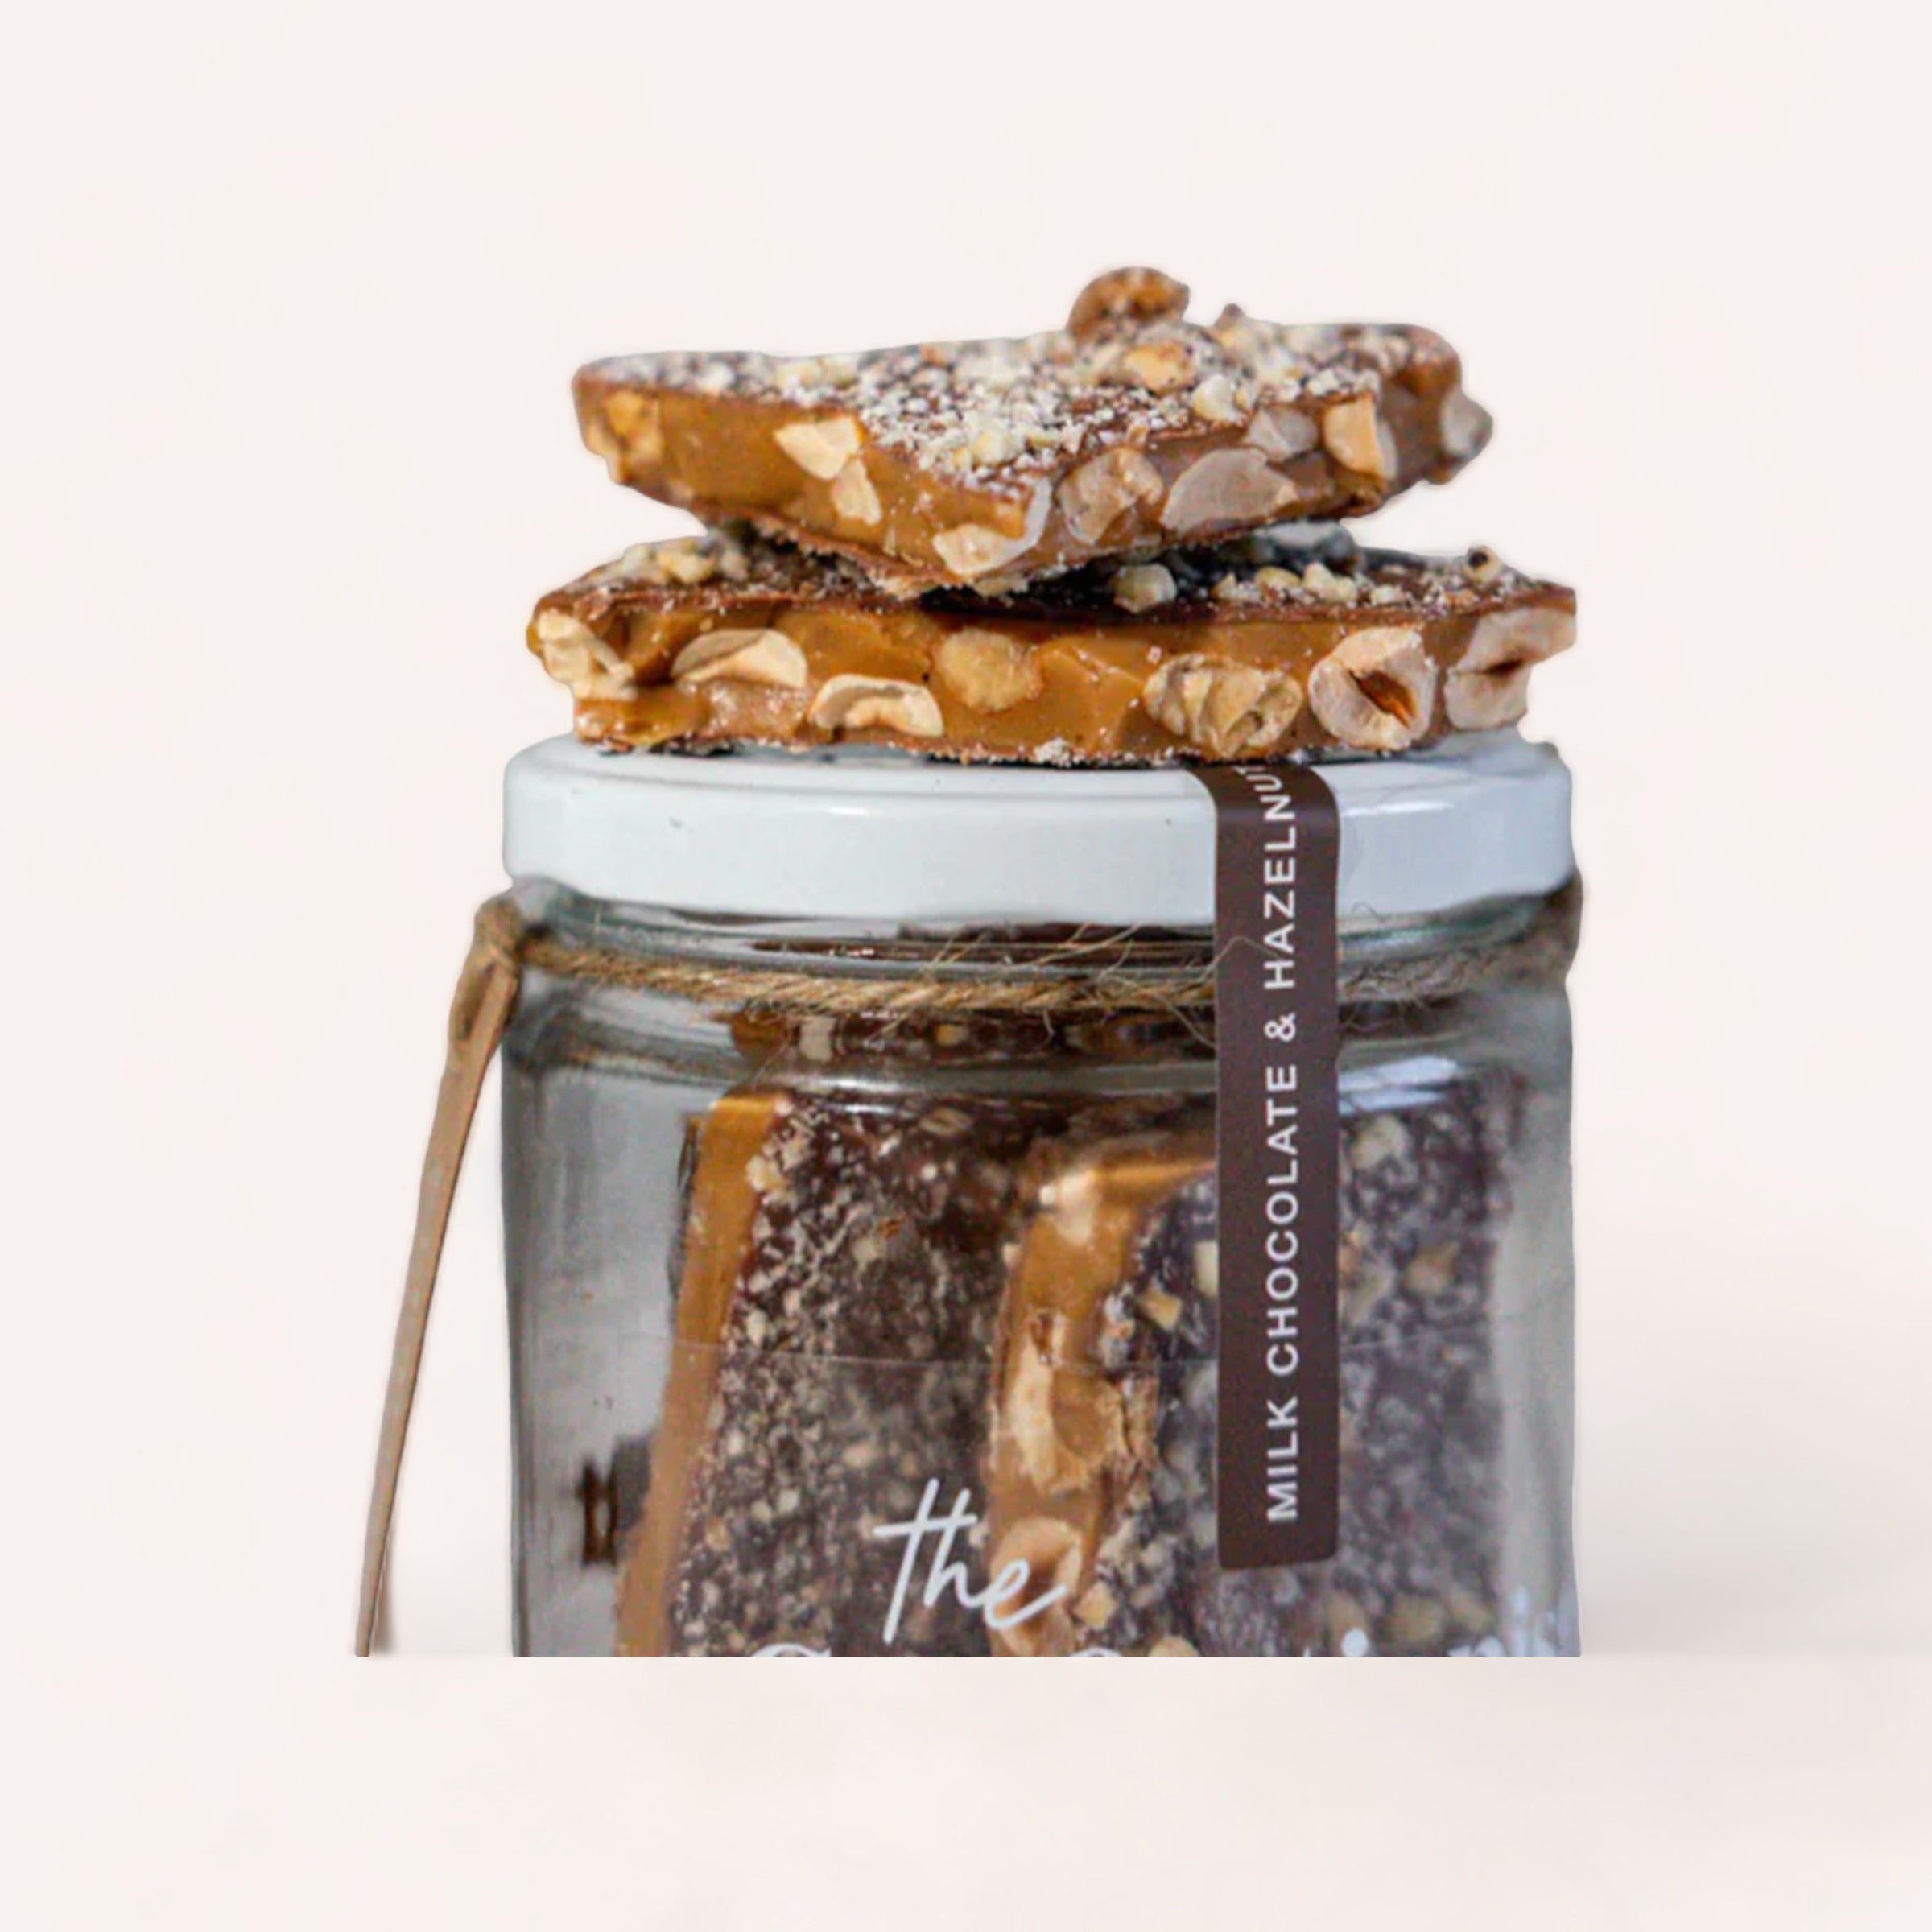 A glass jar labeled "Hazelnut Milk Chocolate Toffee" by The Confectionist filled with chocolate pieces, topped with two chocolate hazelnut bars sprinkled with sea salt, against a white background.